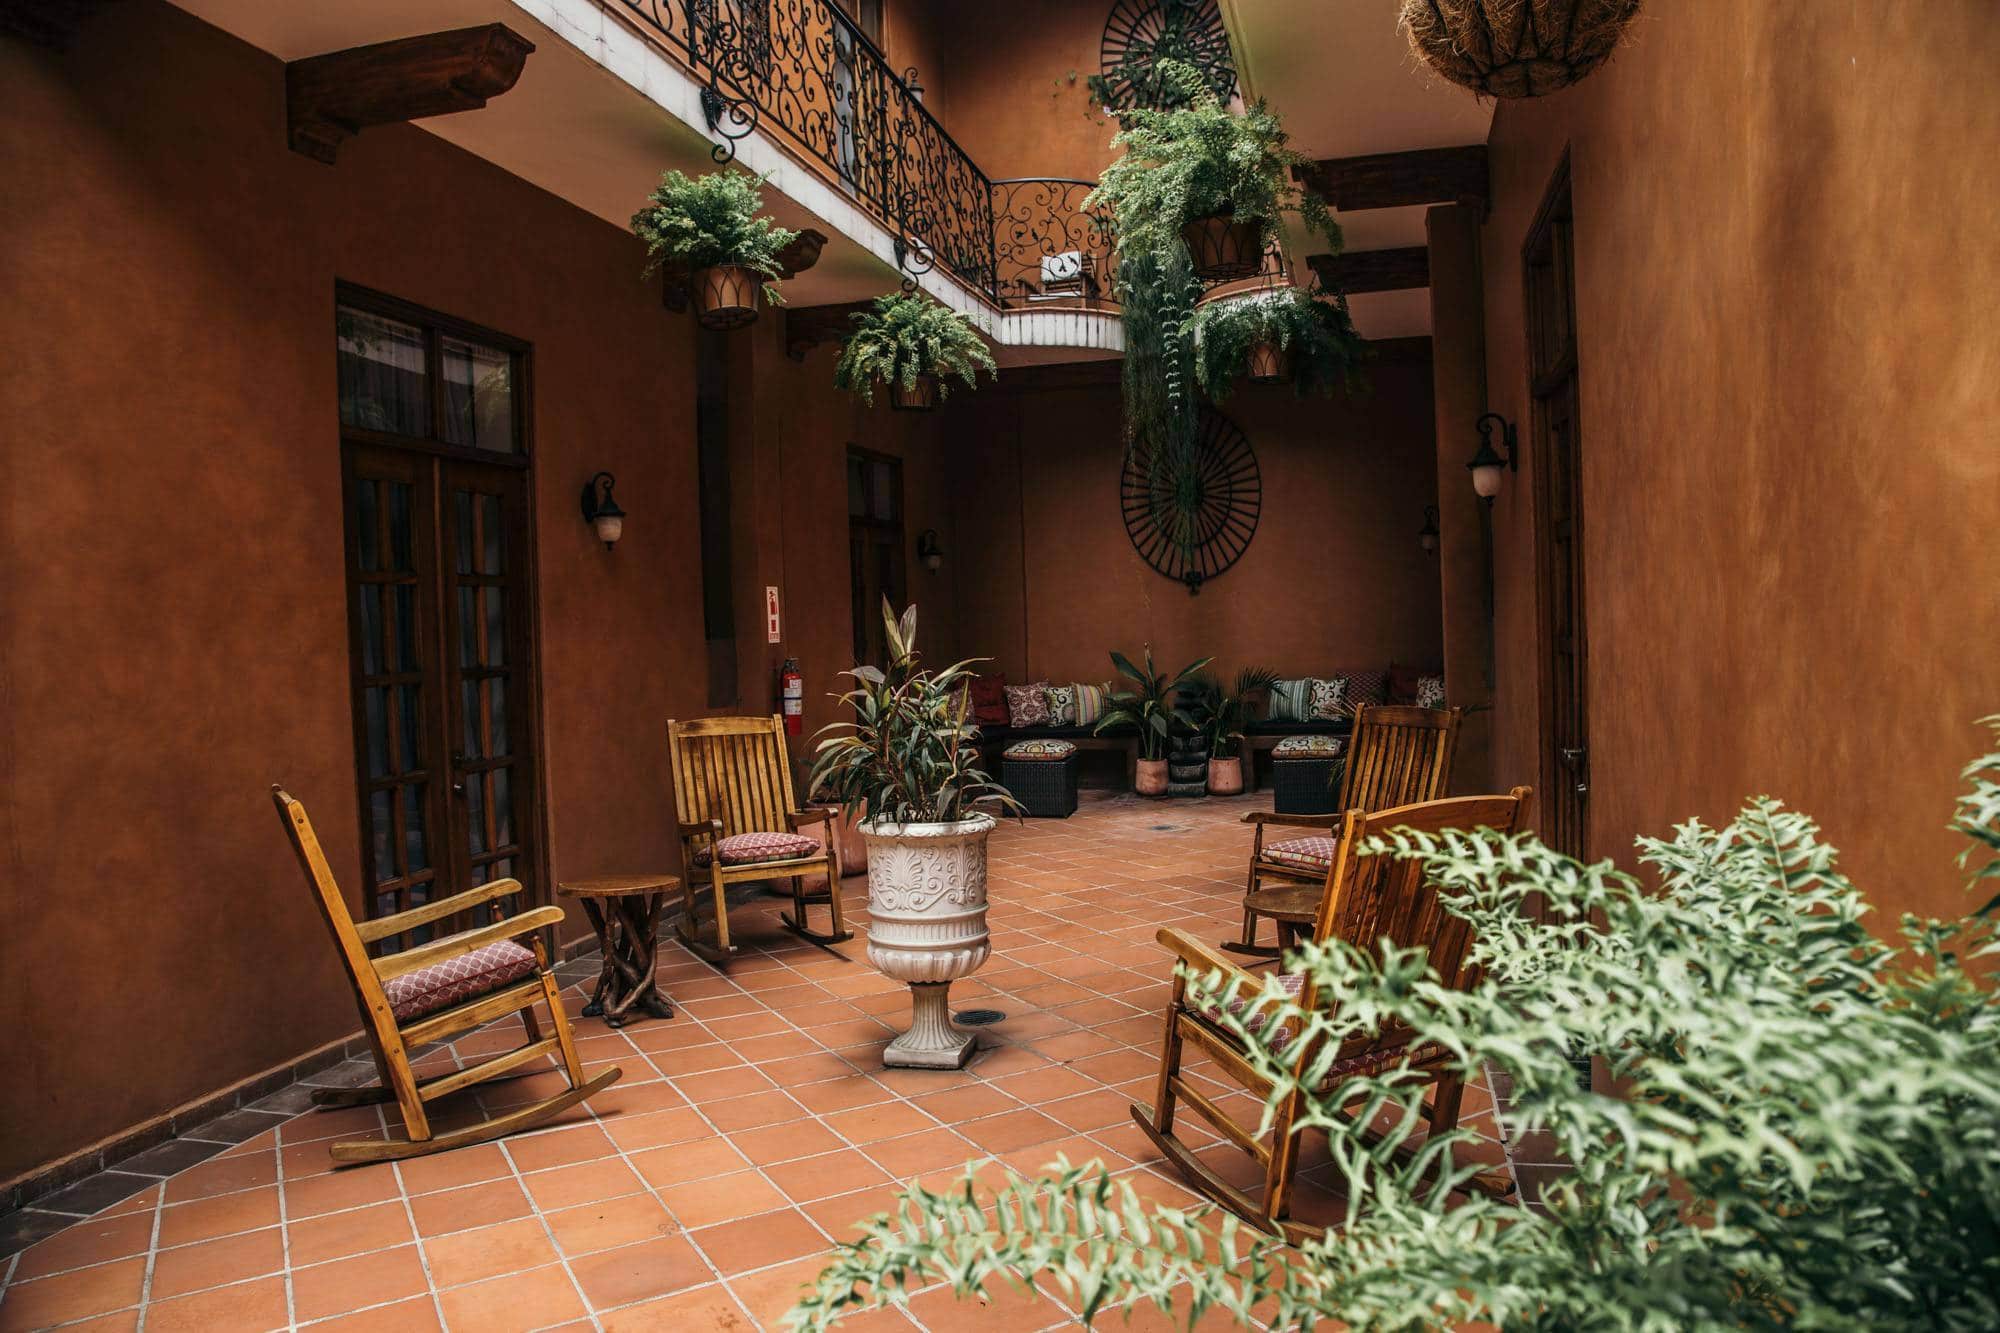 La Isabela Suites has a Gorgeous Spanish Style Courtyard with Plants